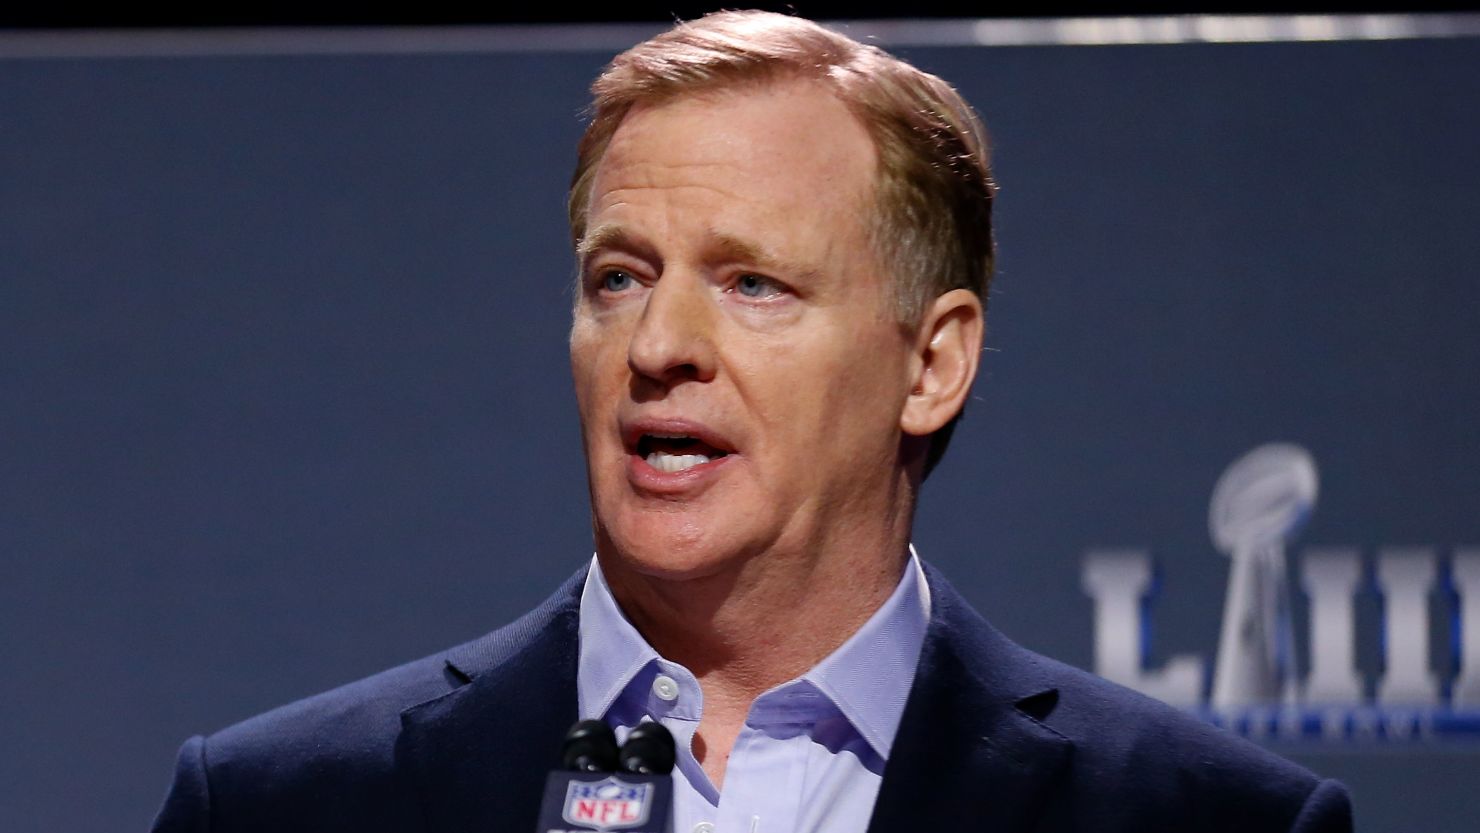 NFL Commissioner Roger Goodell speaks during a press conference during Super Bowl LIII Week on January 30, 2019 in Atlanta, Georgia.